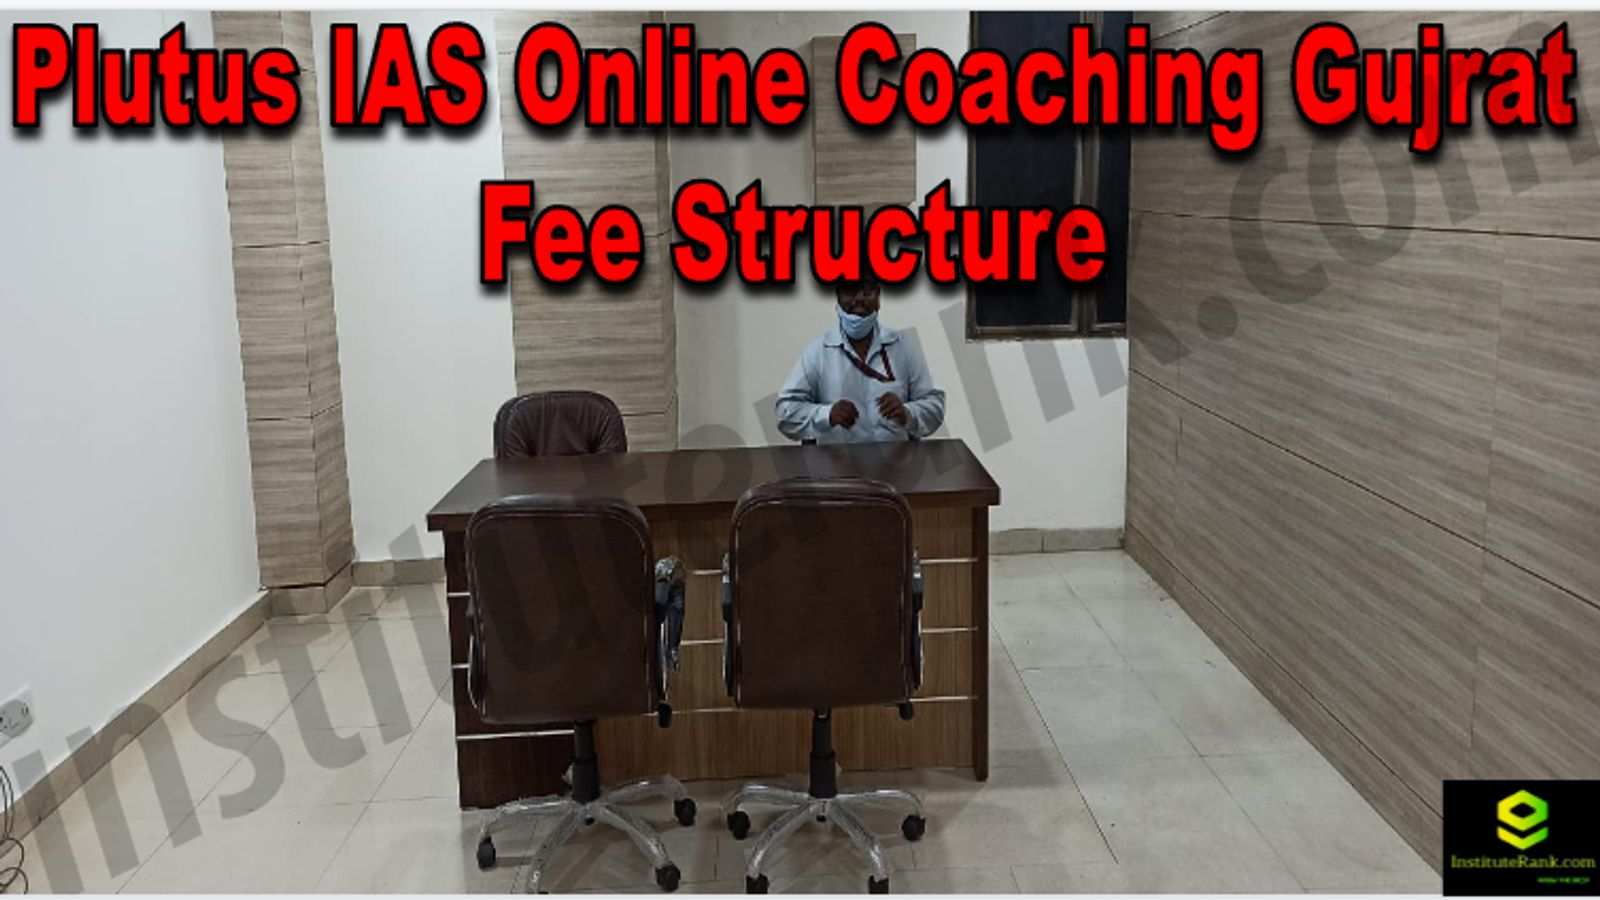 Plutus IAS Online Coaching Gujrat Reviews Fee Structure